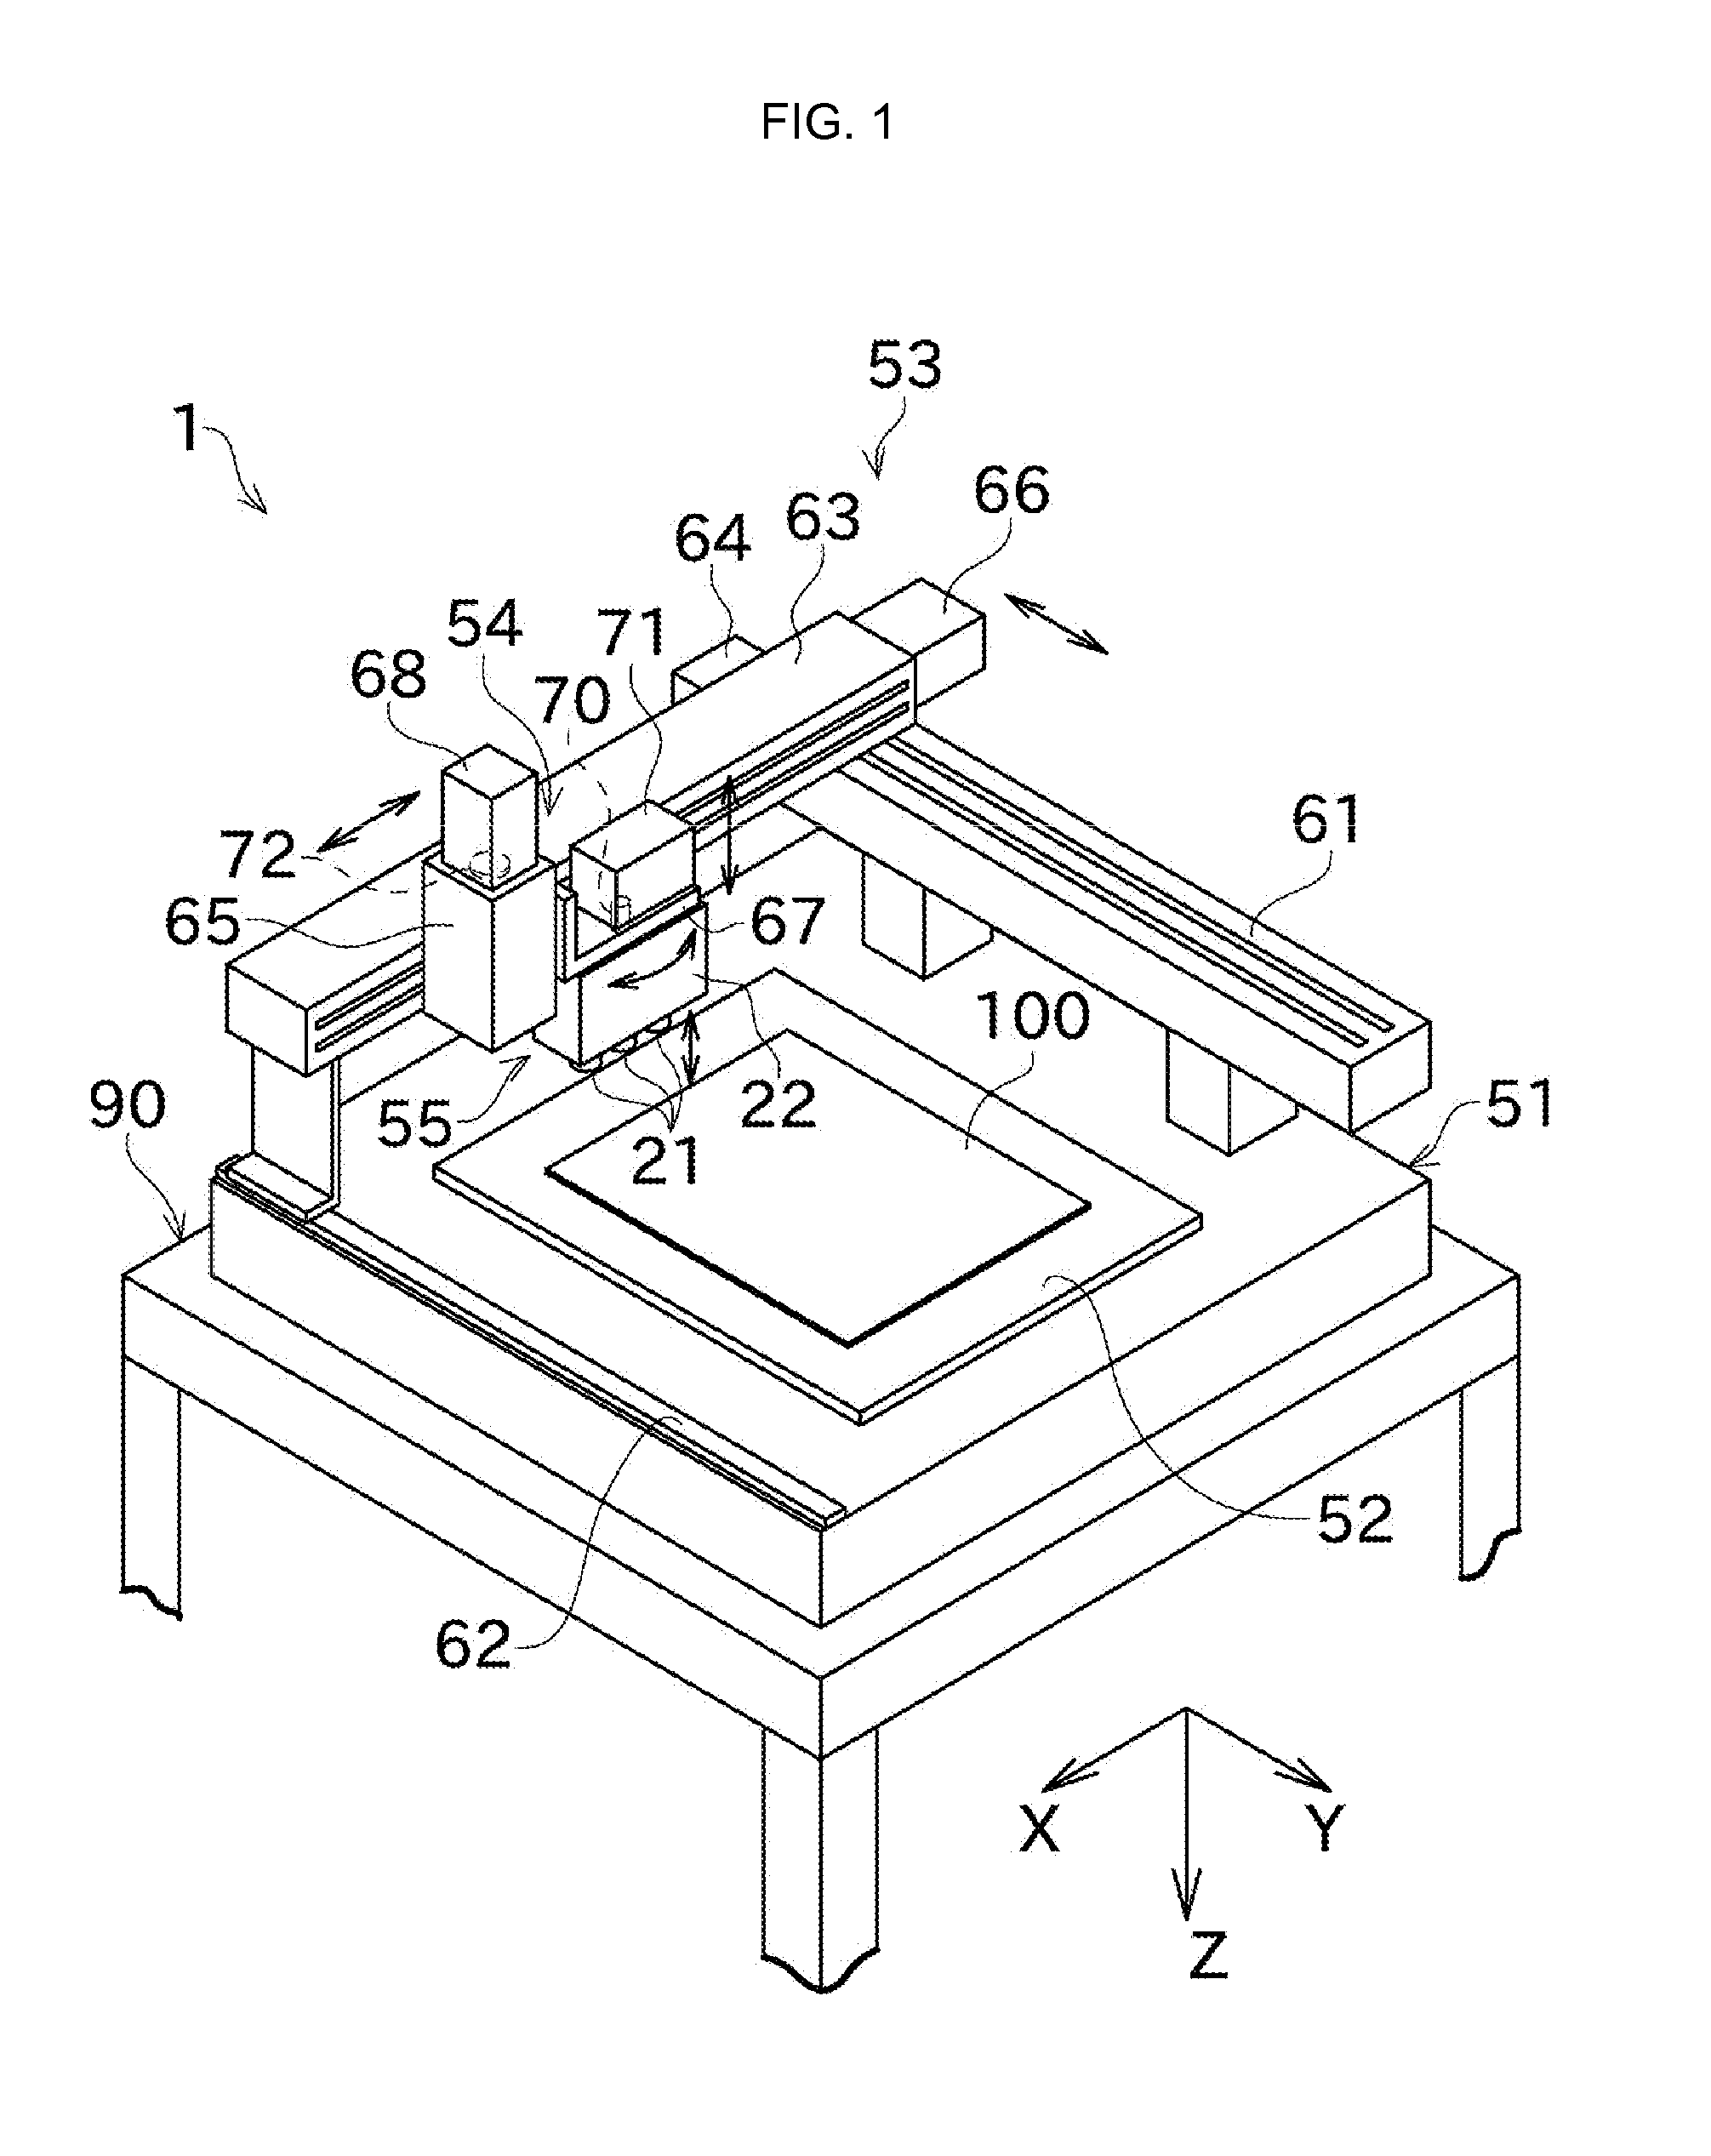 Touch panel inspecting apparatus